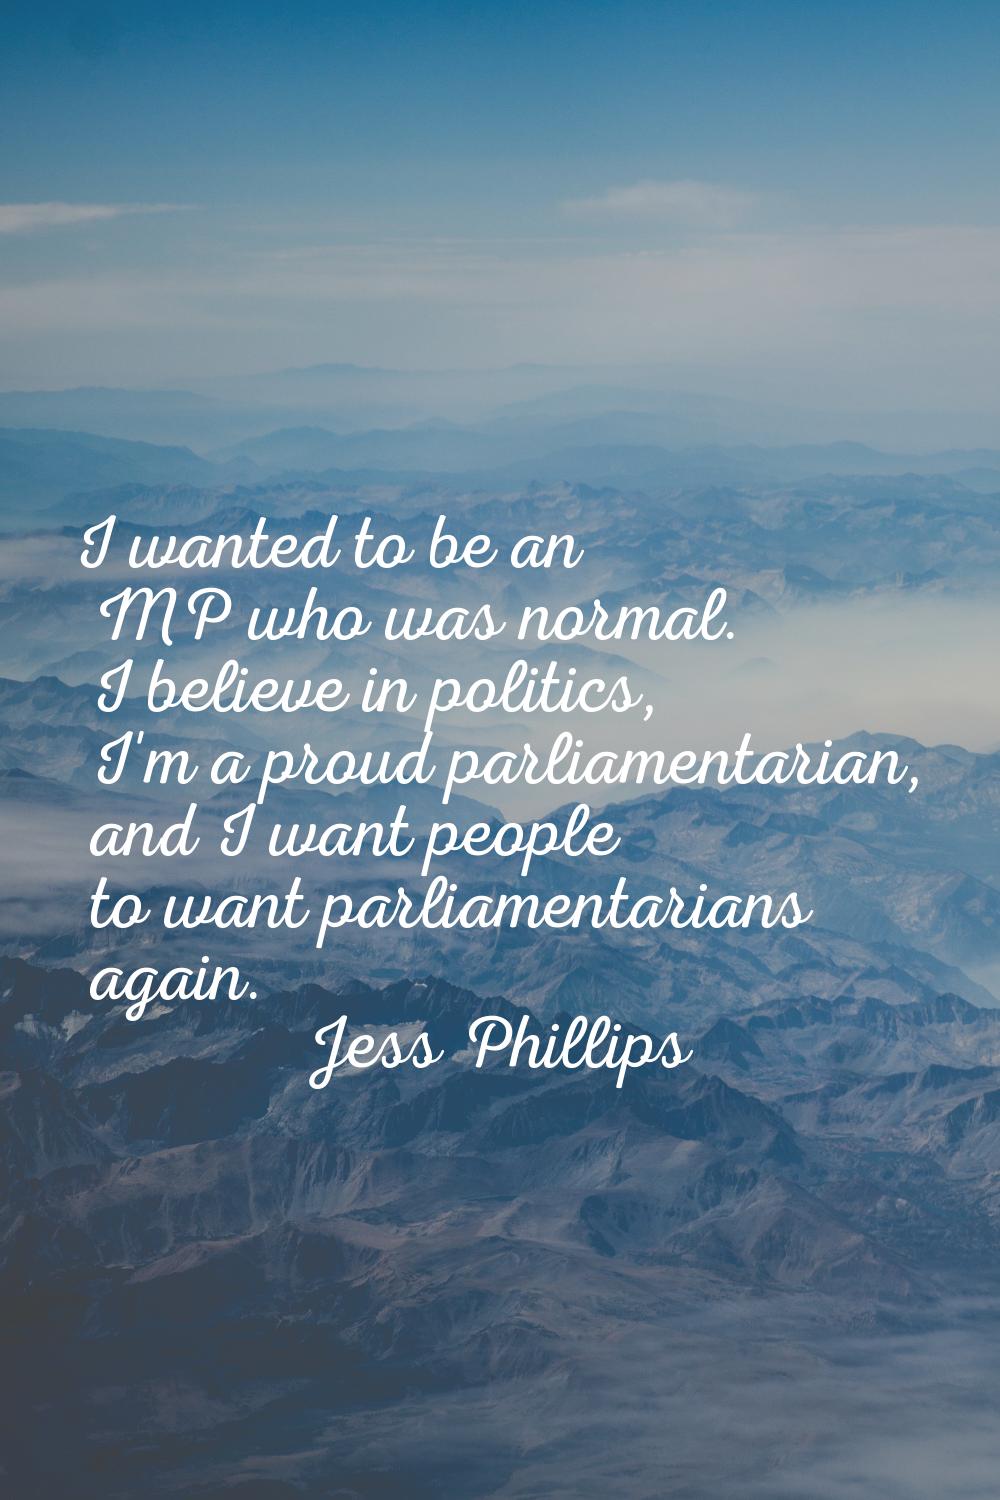 I wanted to be an MP who was normal. I believe in politics, I'm a proud parliamentarian, and I want